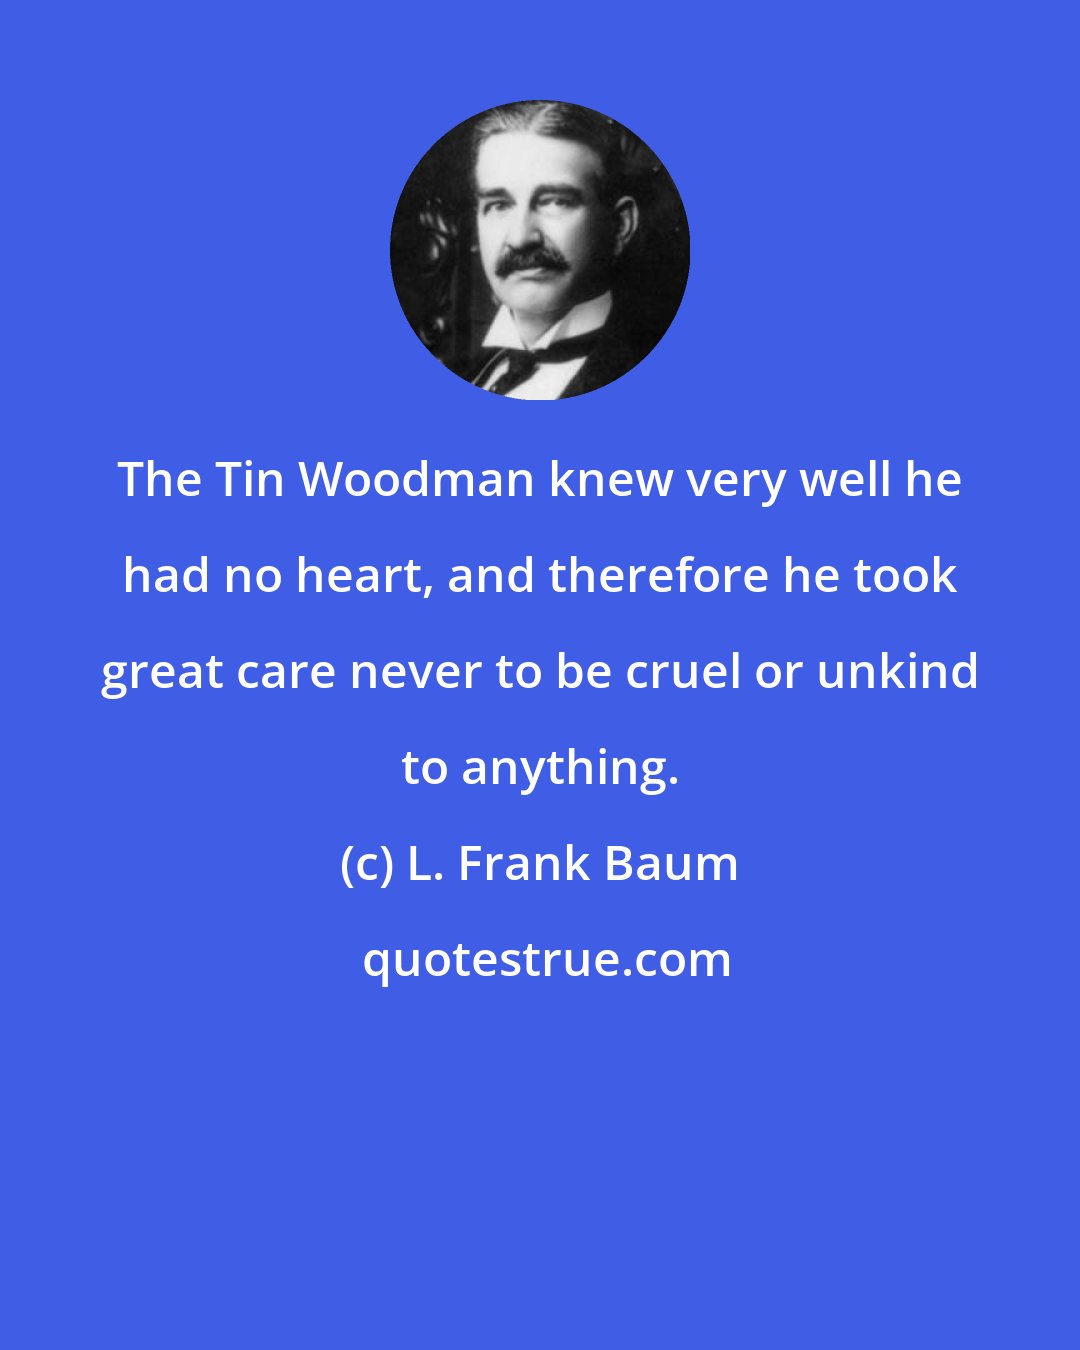 L. Frank Baum: The Tin Woodman knew very well he had no heart, and therefore he took great care never to be cruel or unkind to anything.